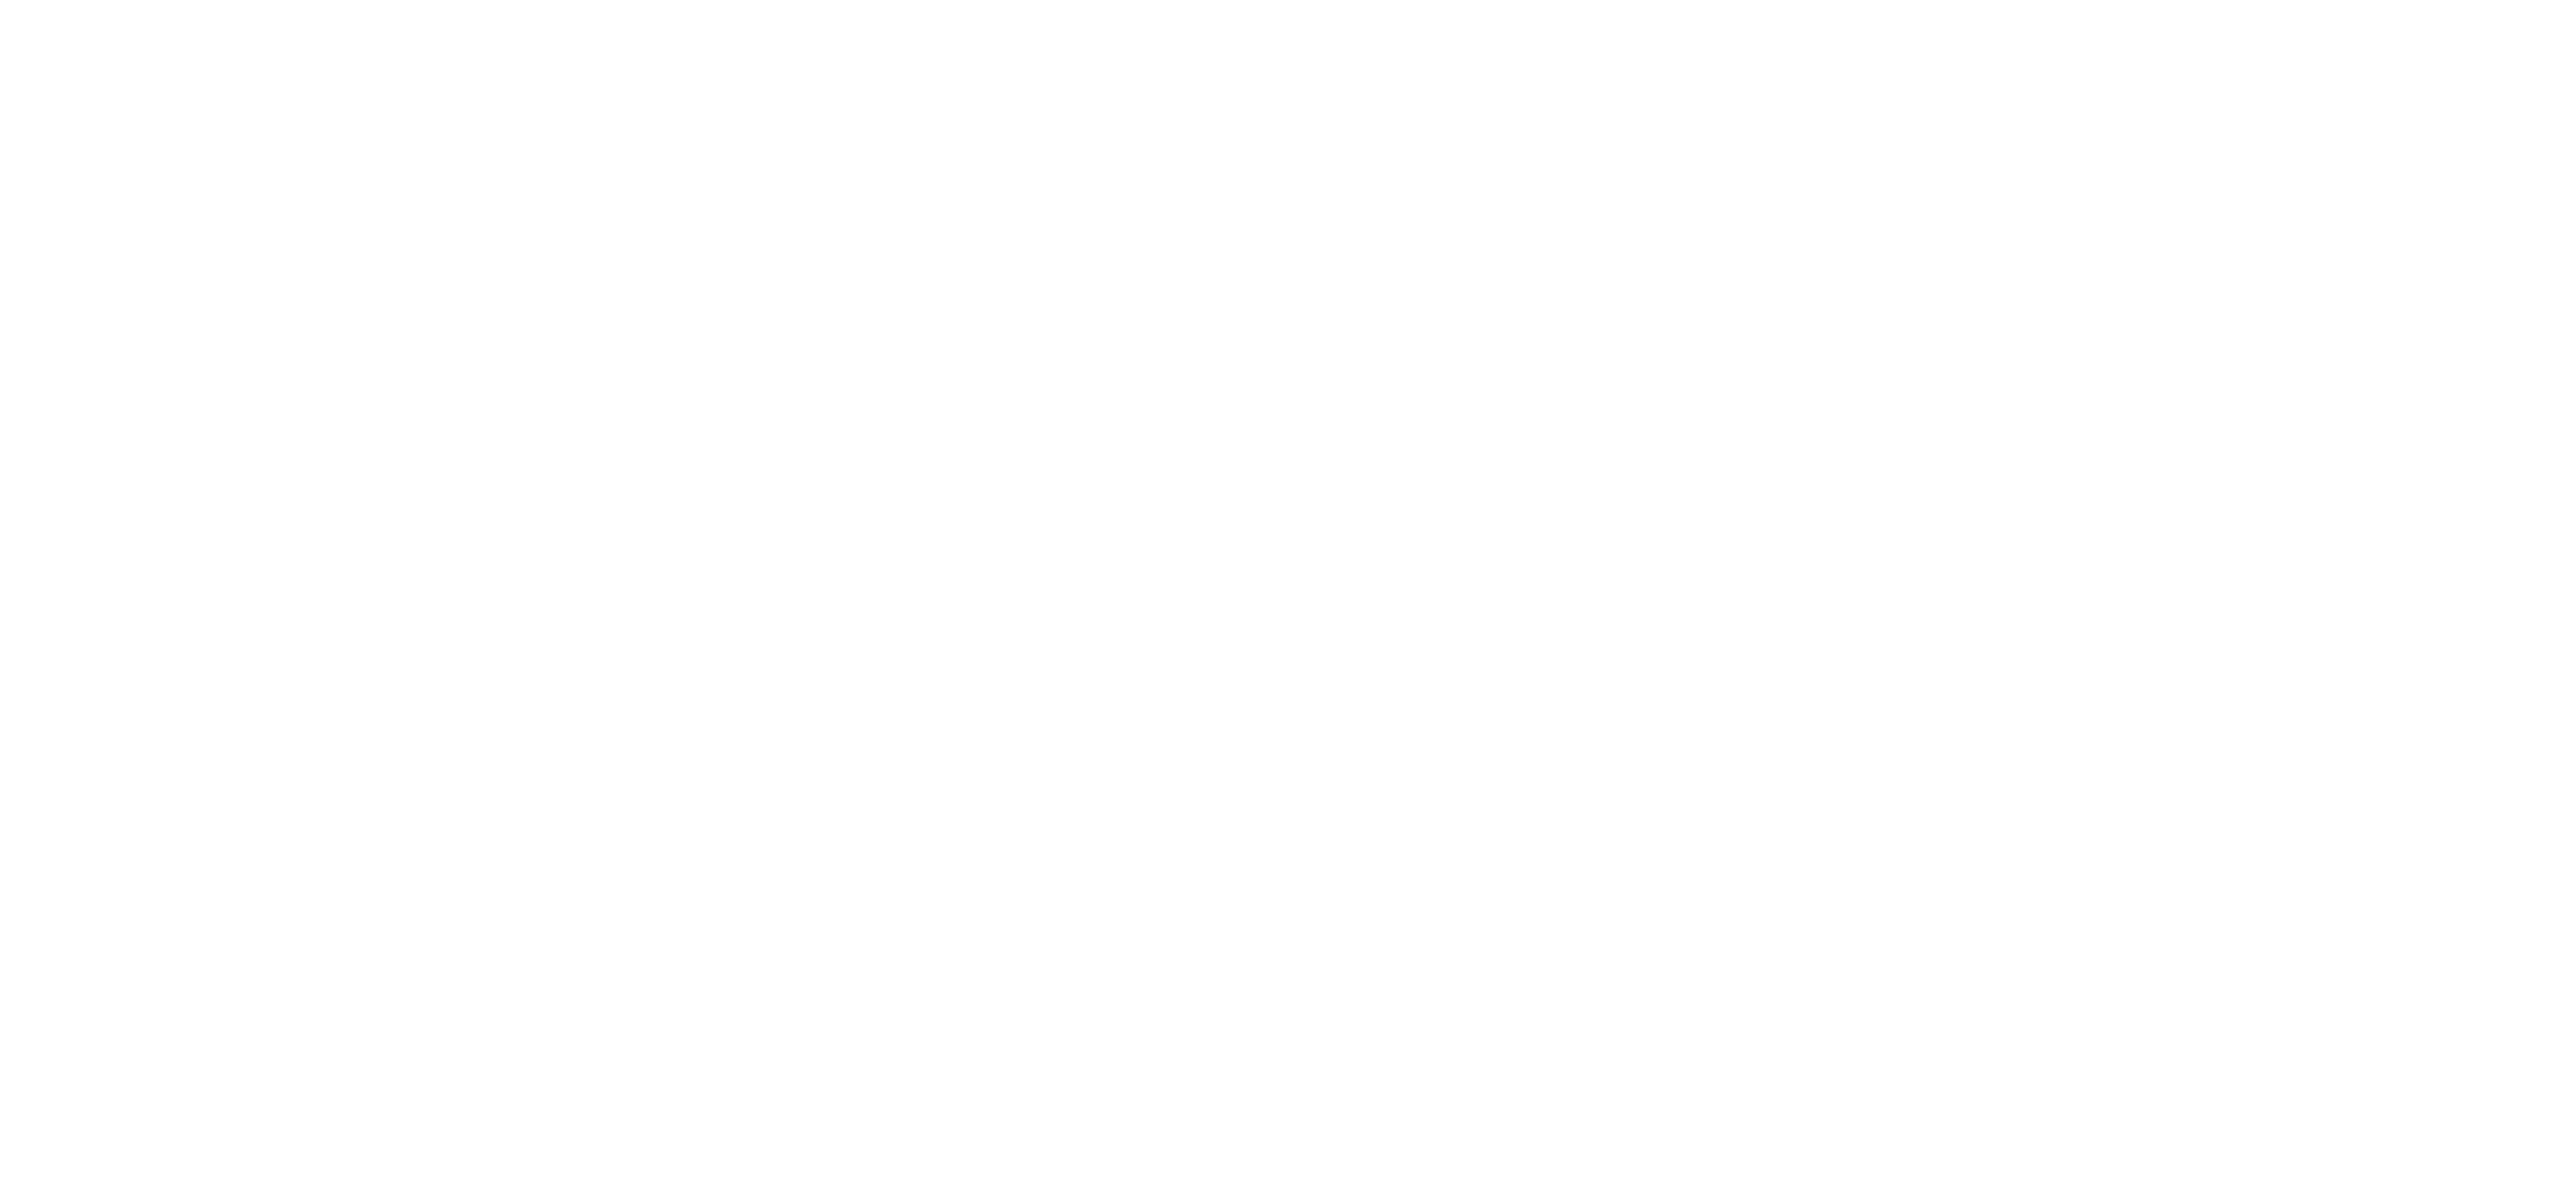 The Poundly logo with text on a transparent background